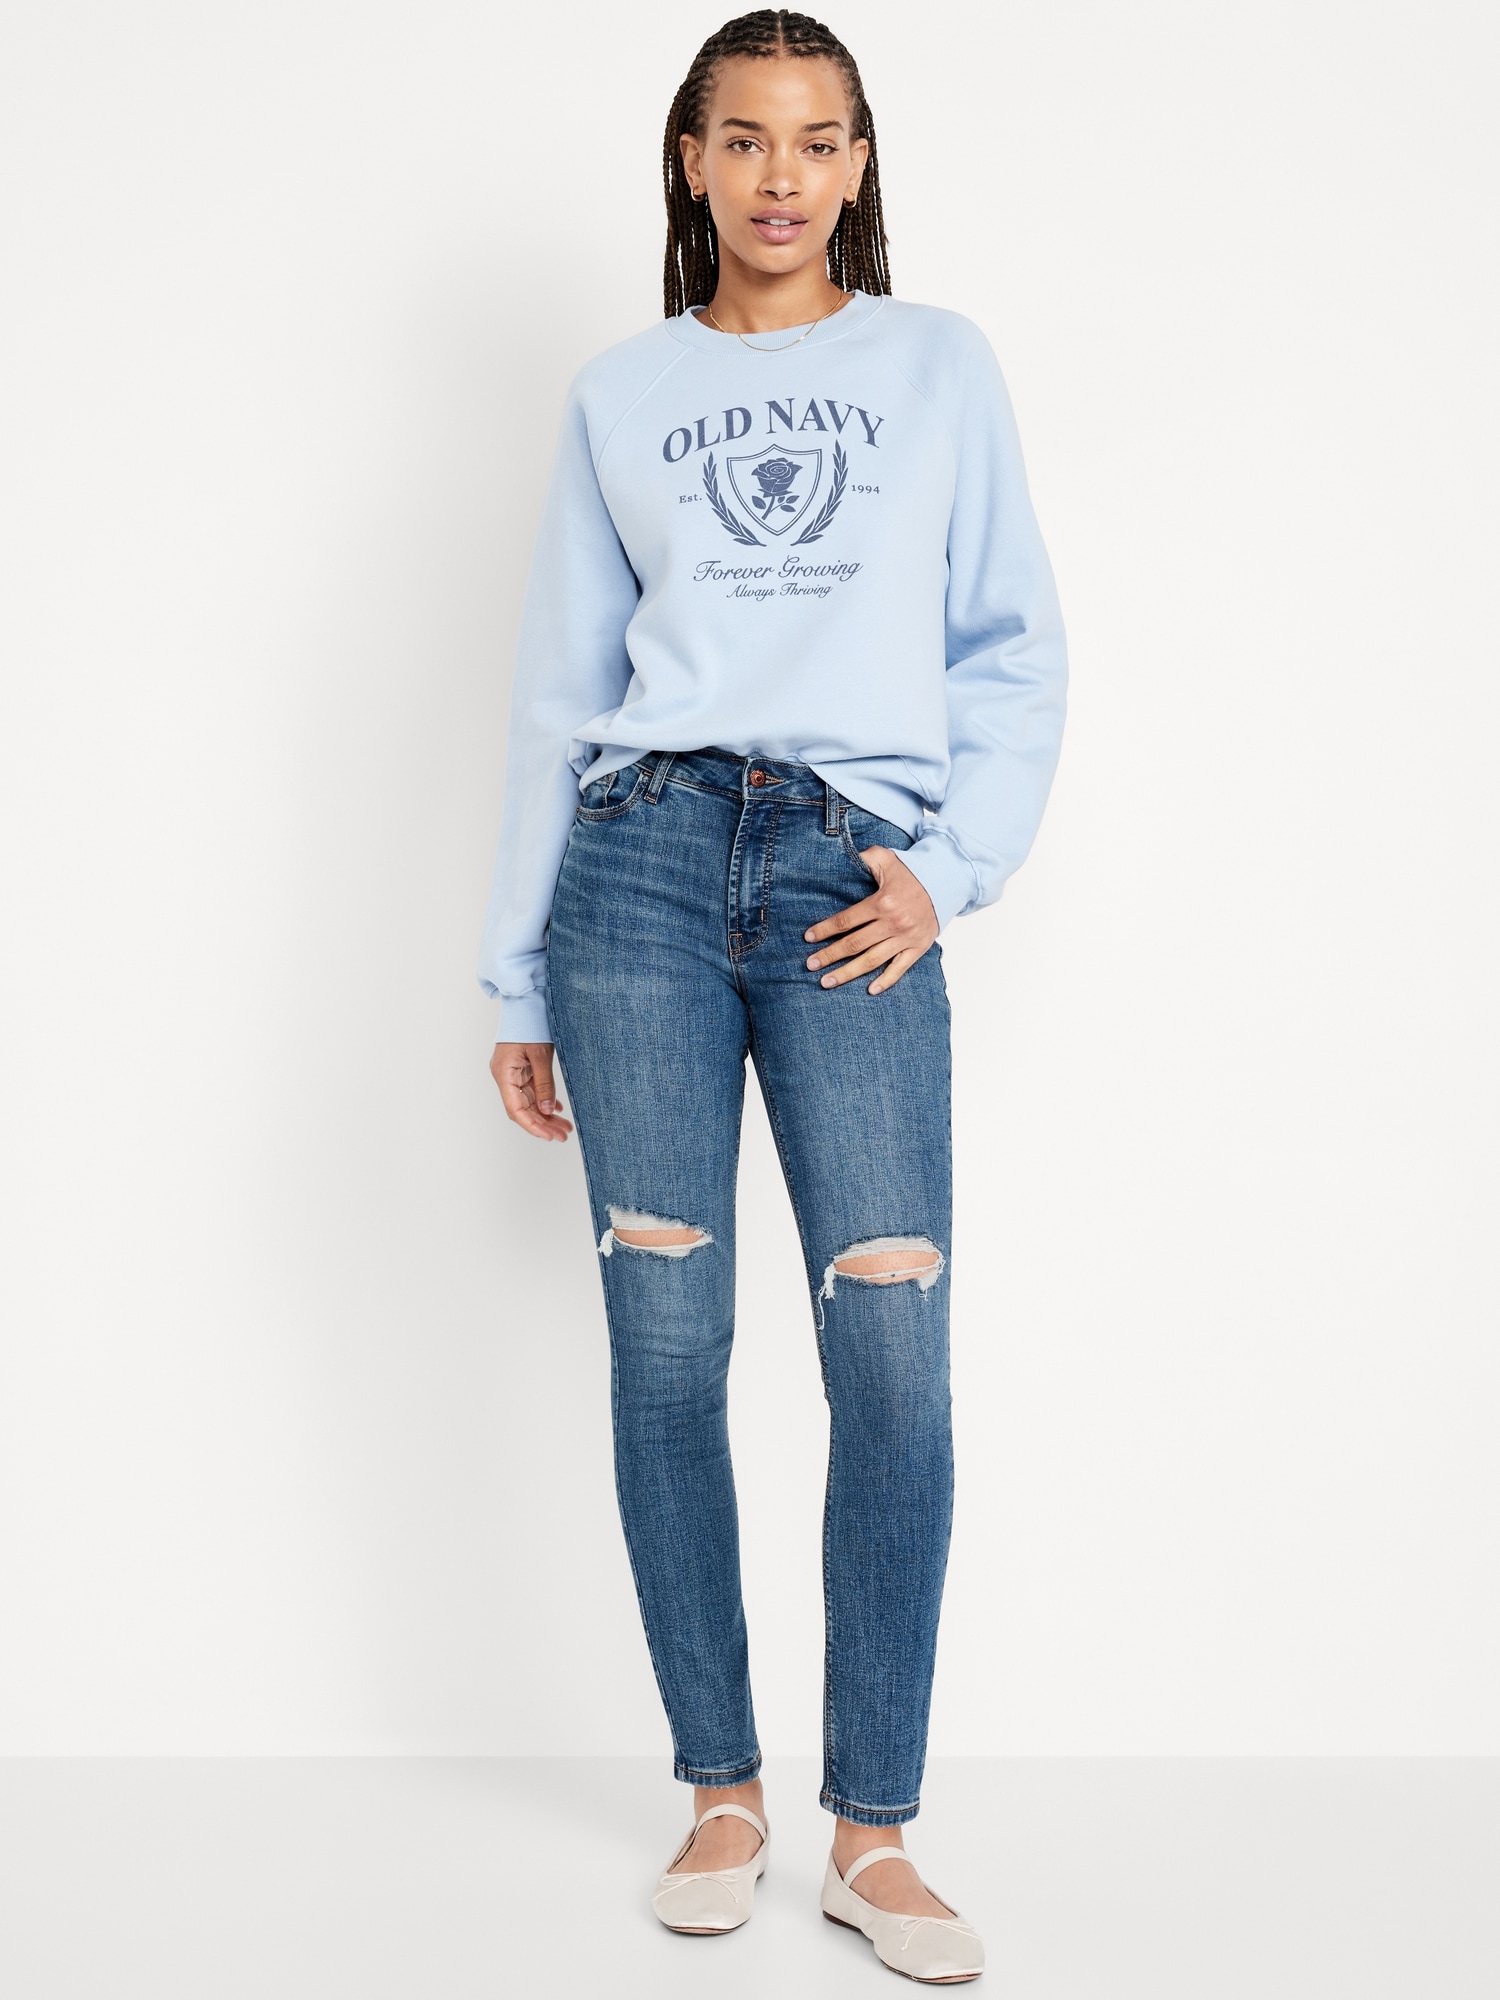 High-Waisted Rockstar Super-Skinny Ripped Jeans for Women